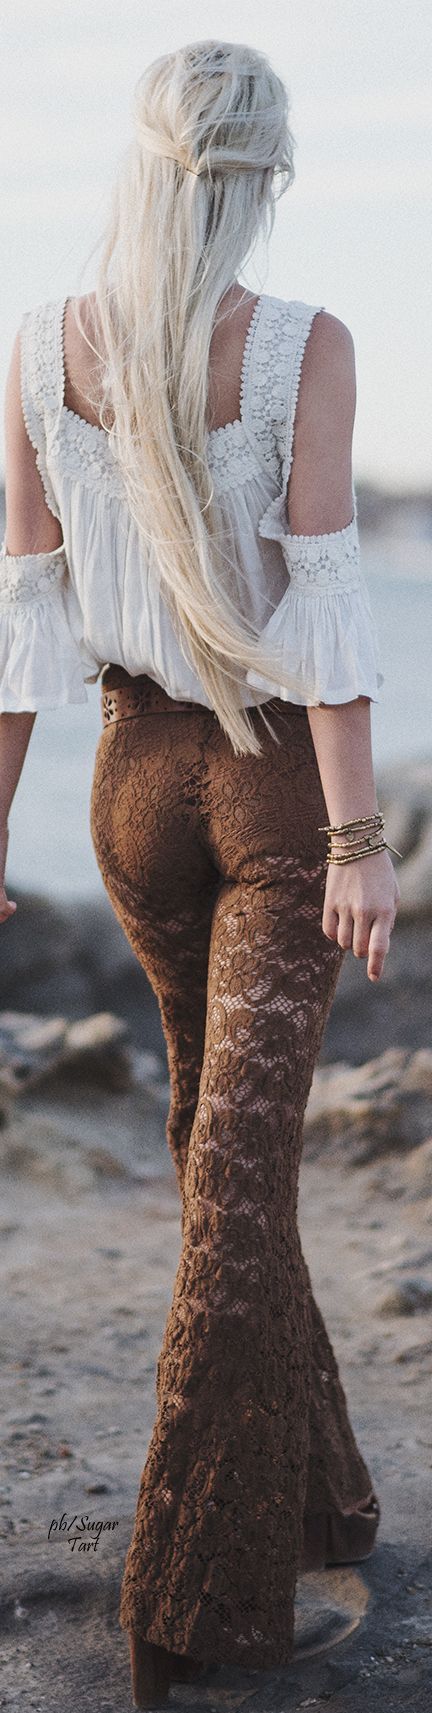 Hippie boho bohemian gypsy style lace trousers. For more follow www.pinterest.com/ninayay and stay positively #inspired